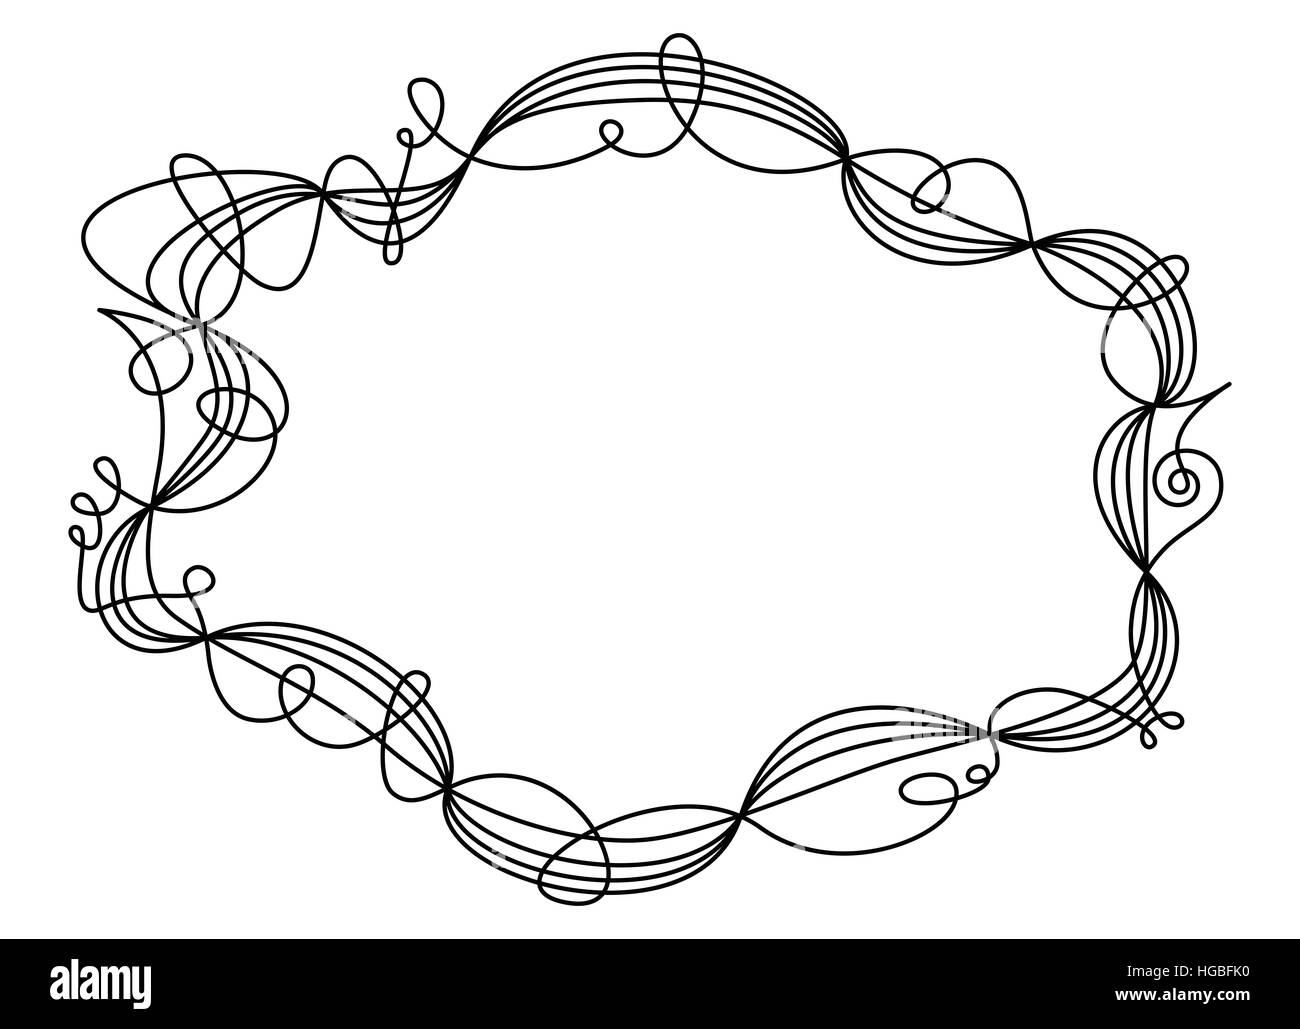 Single swing thread frame. Decorative ornament and border for text and images. One line going five times around. Stock Photo